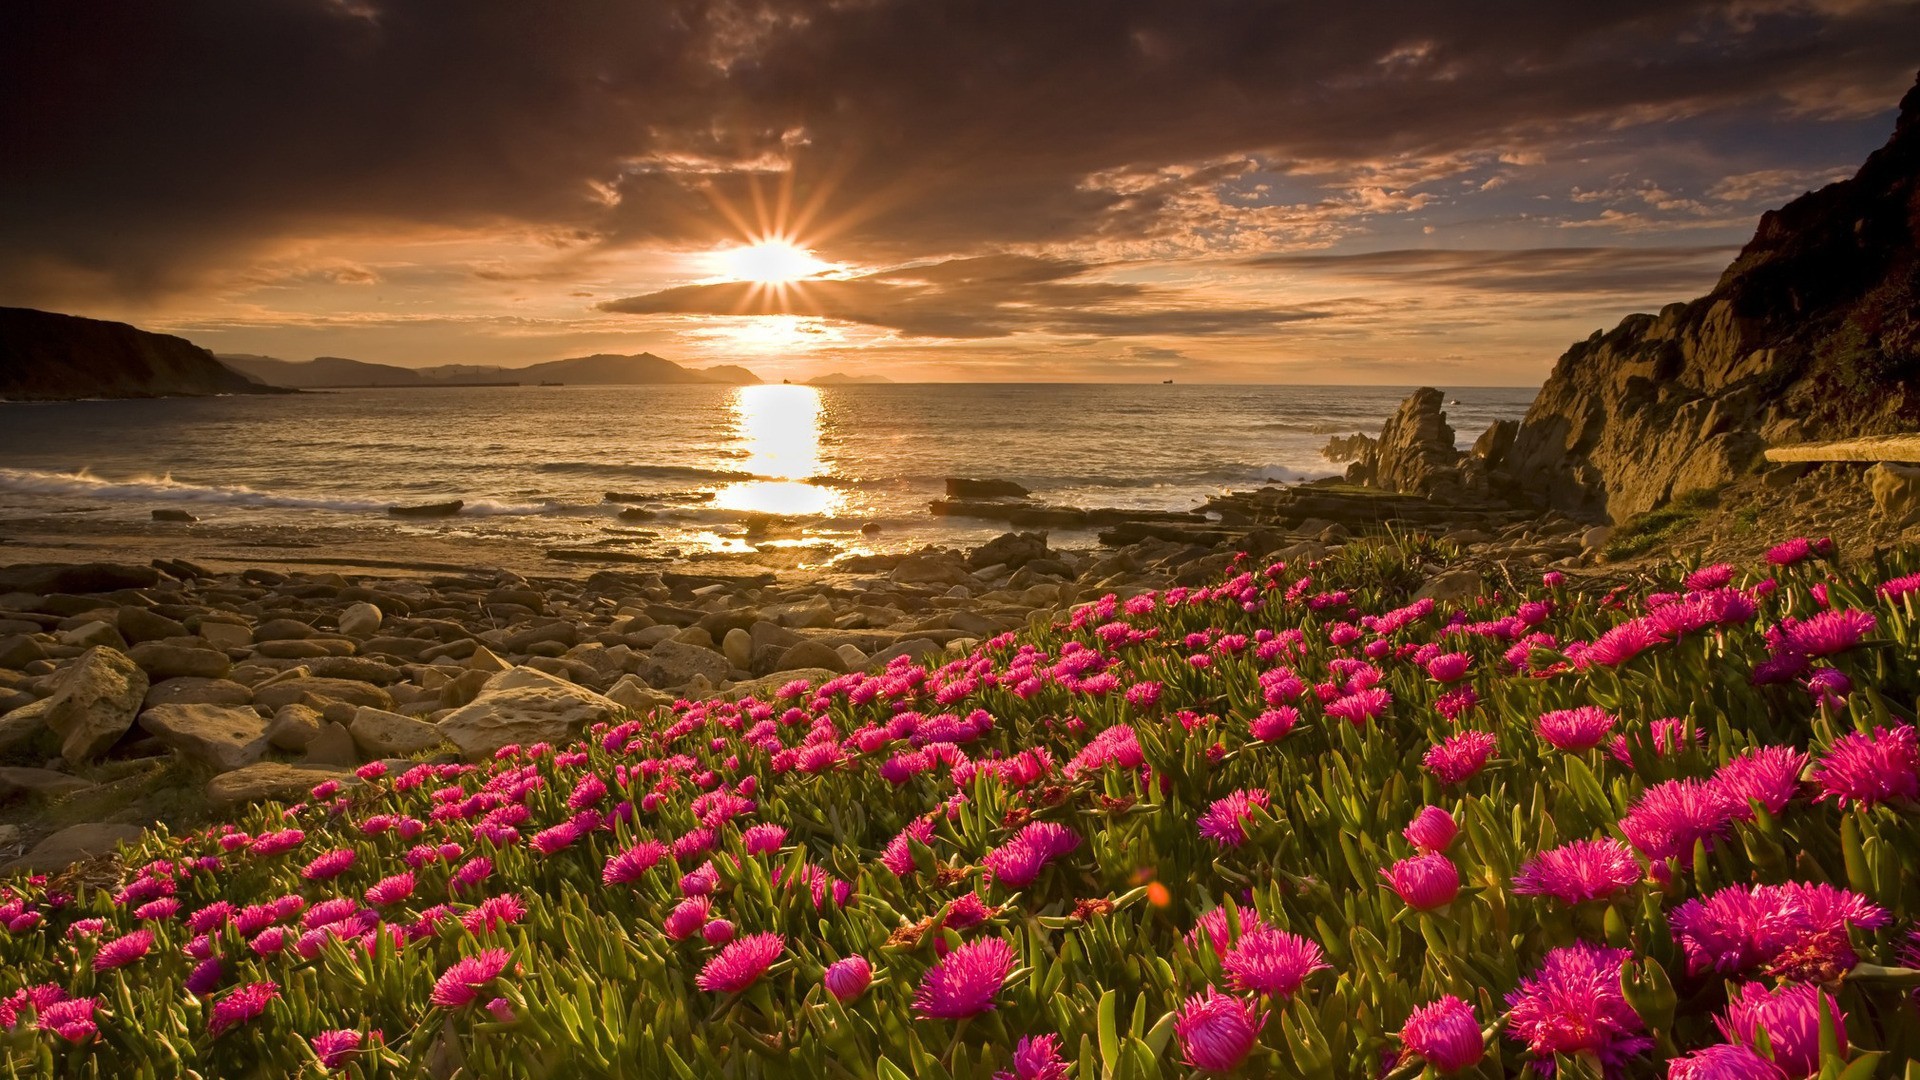 Nature___Flowers_Pink_flowers_by_the_sea_at_sunset_099920_.jpg